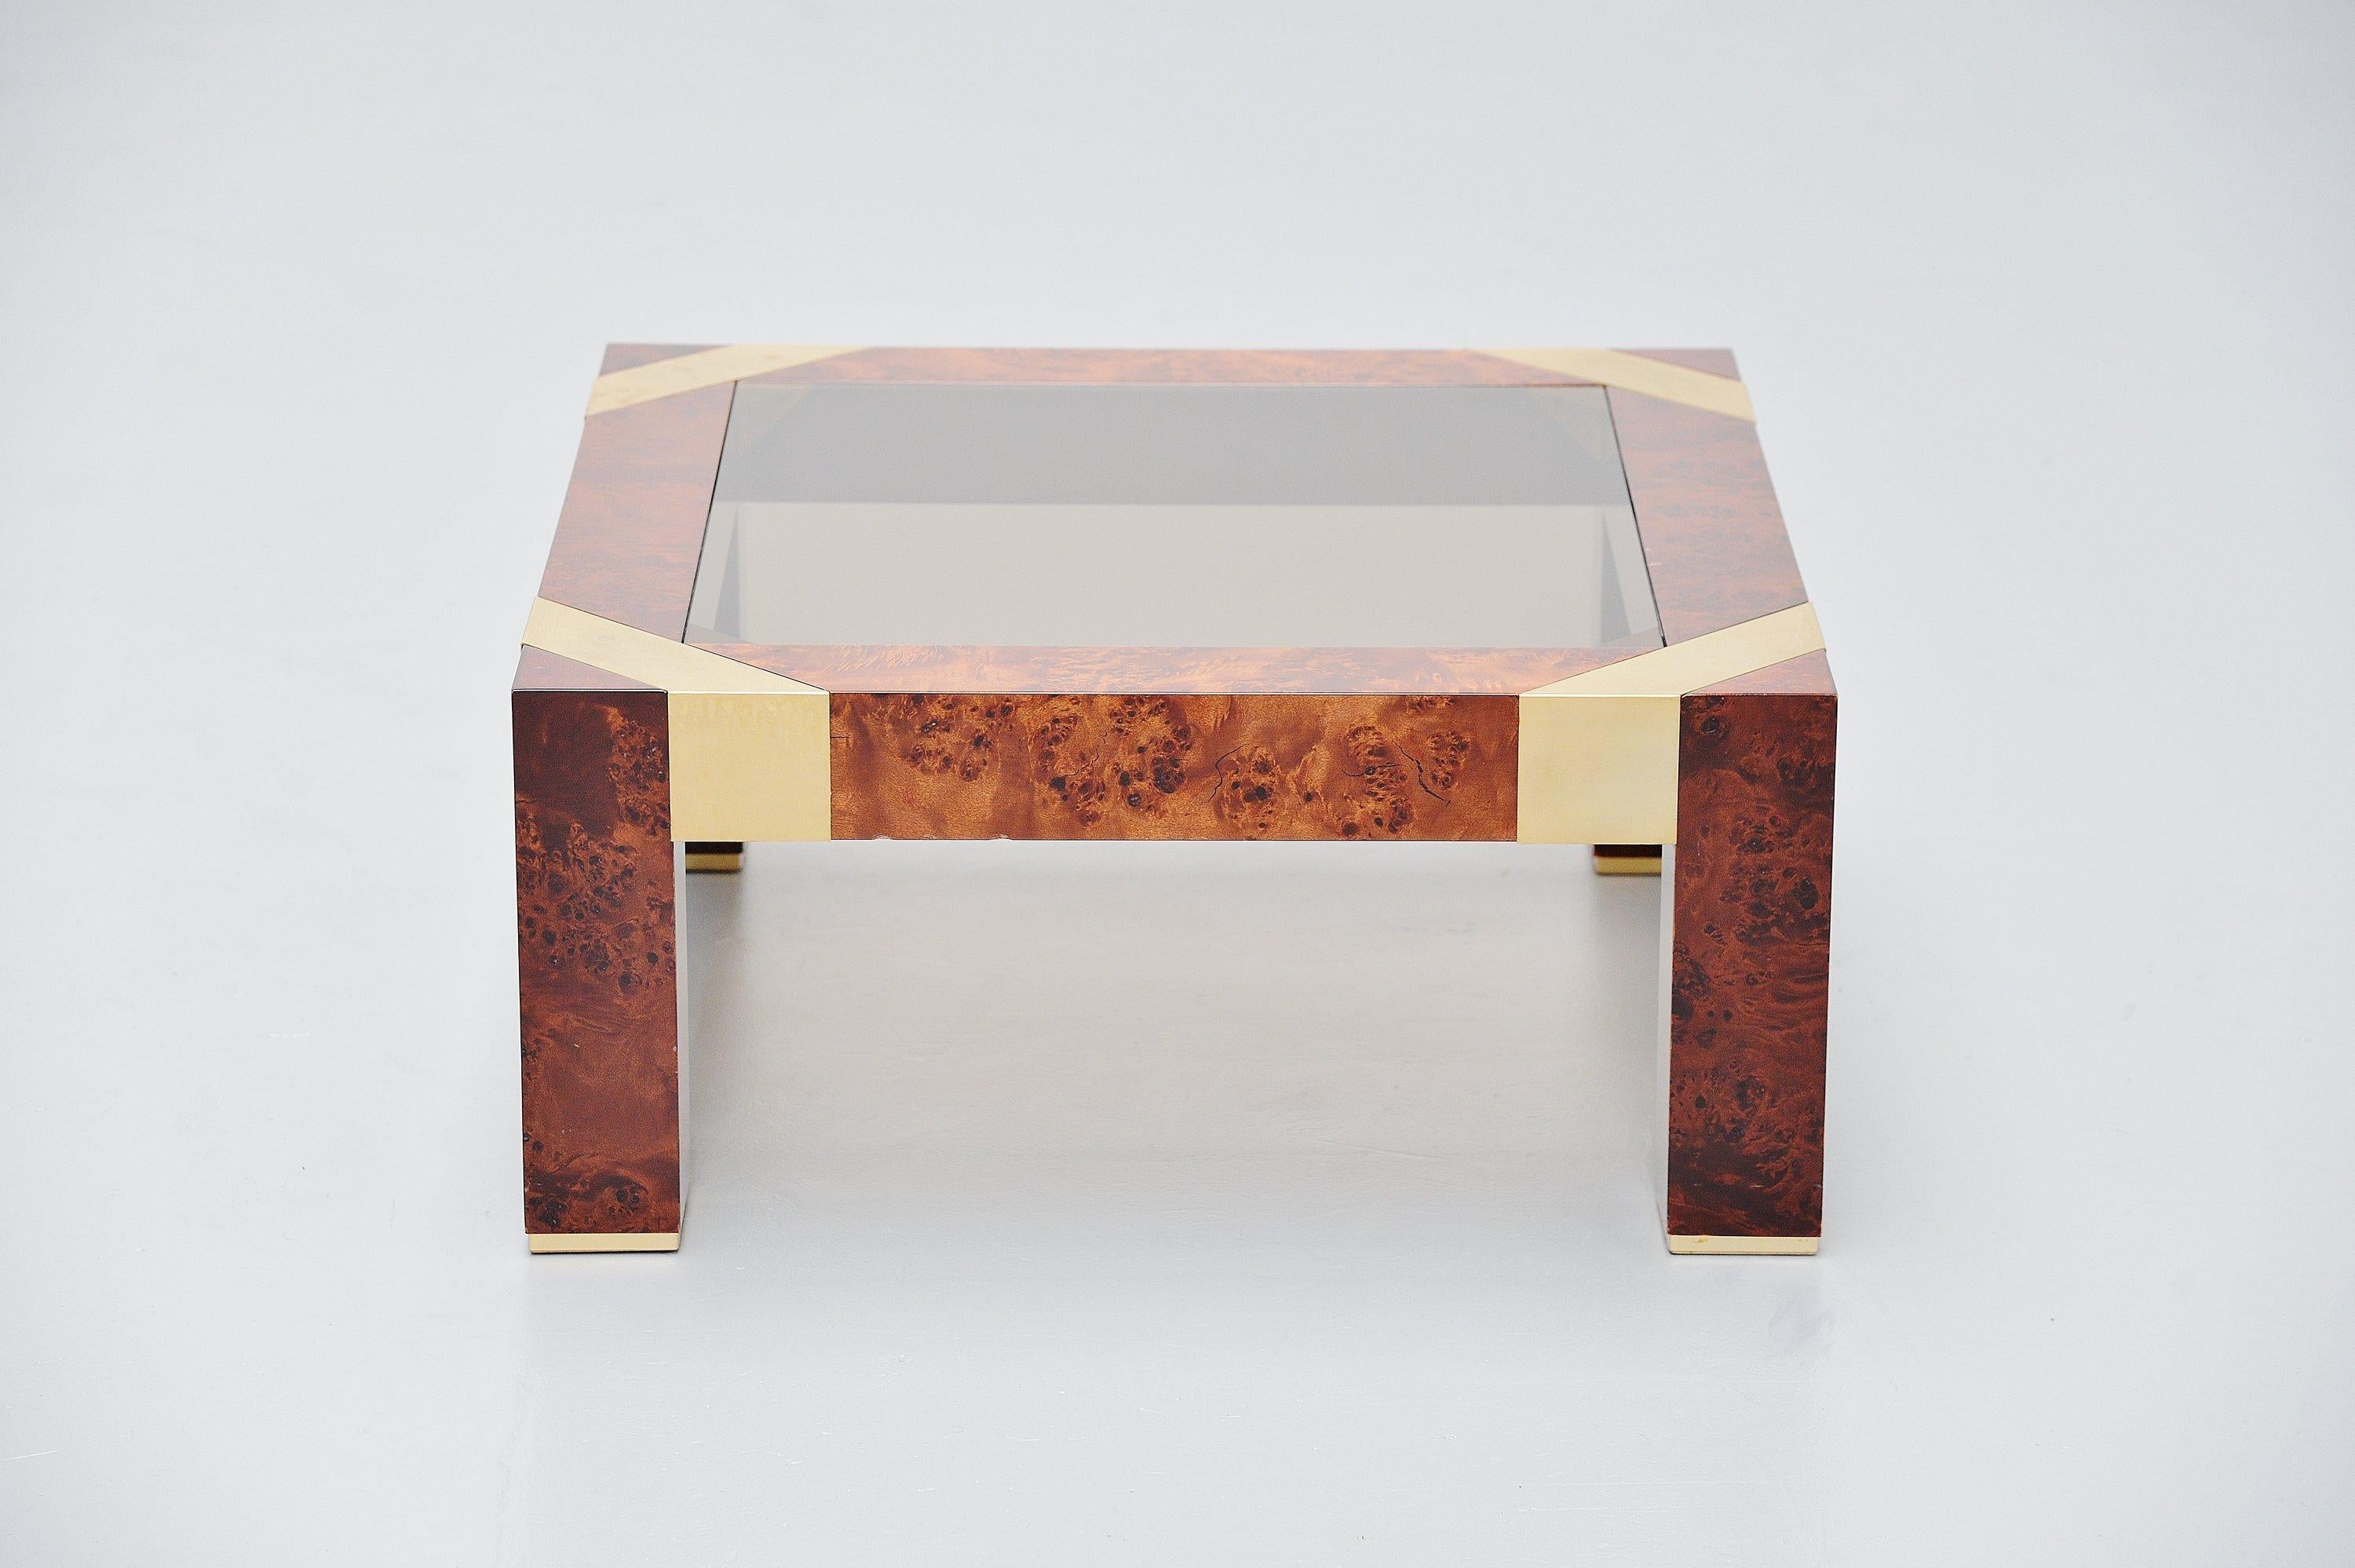 Nice Hollywood Regency style coffee table designed by Jean Claude Mahey and manufactured by Studio Mahey, France, 1970. The sofa has burl wood veneer with gloss finish. The details are made of brass plated metal and it has a smoked glass top. The